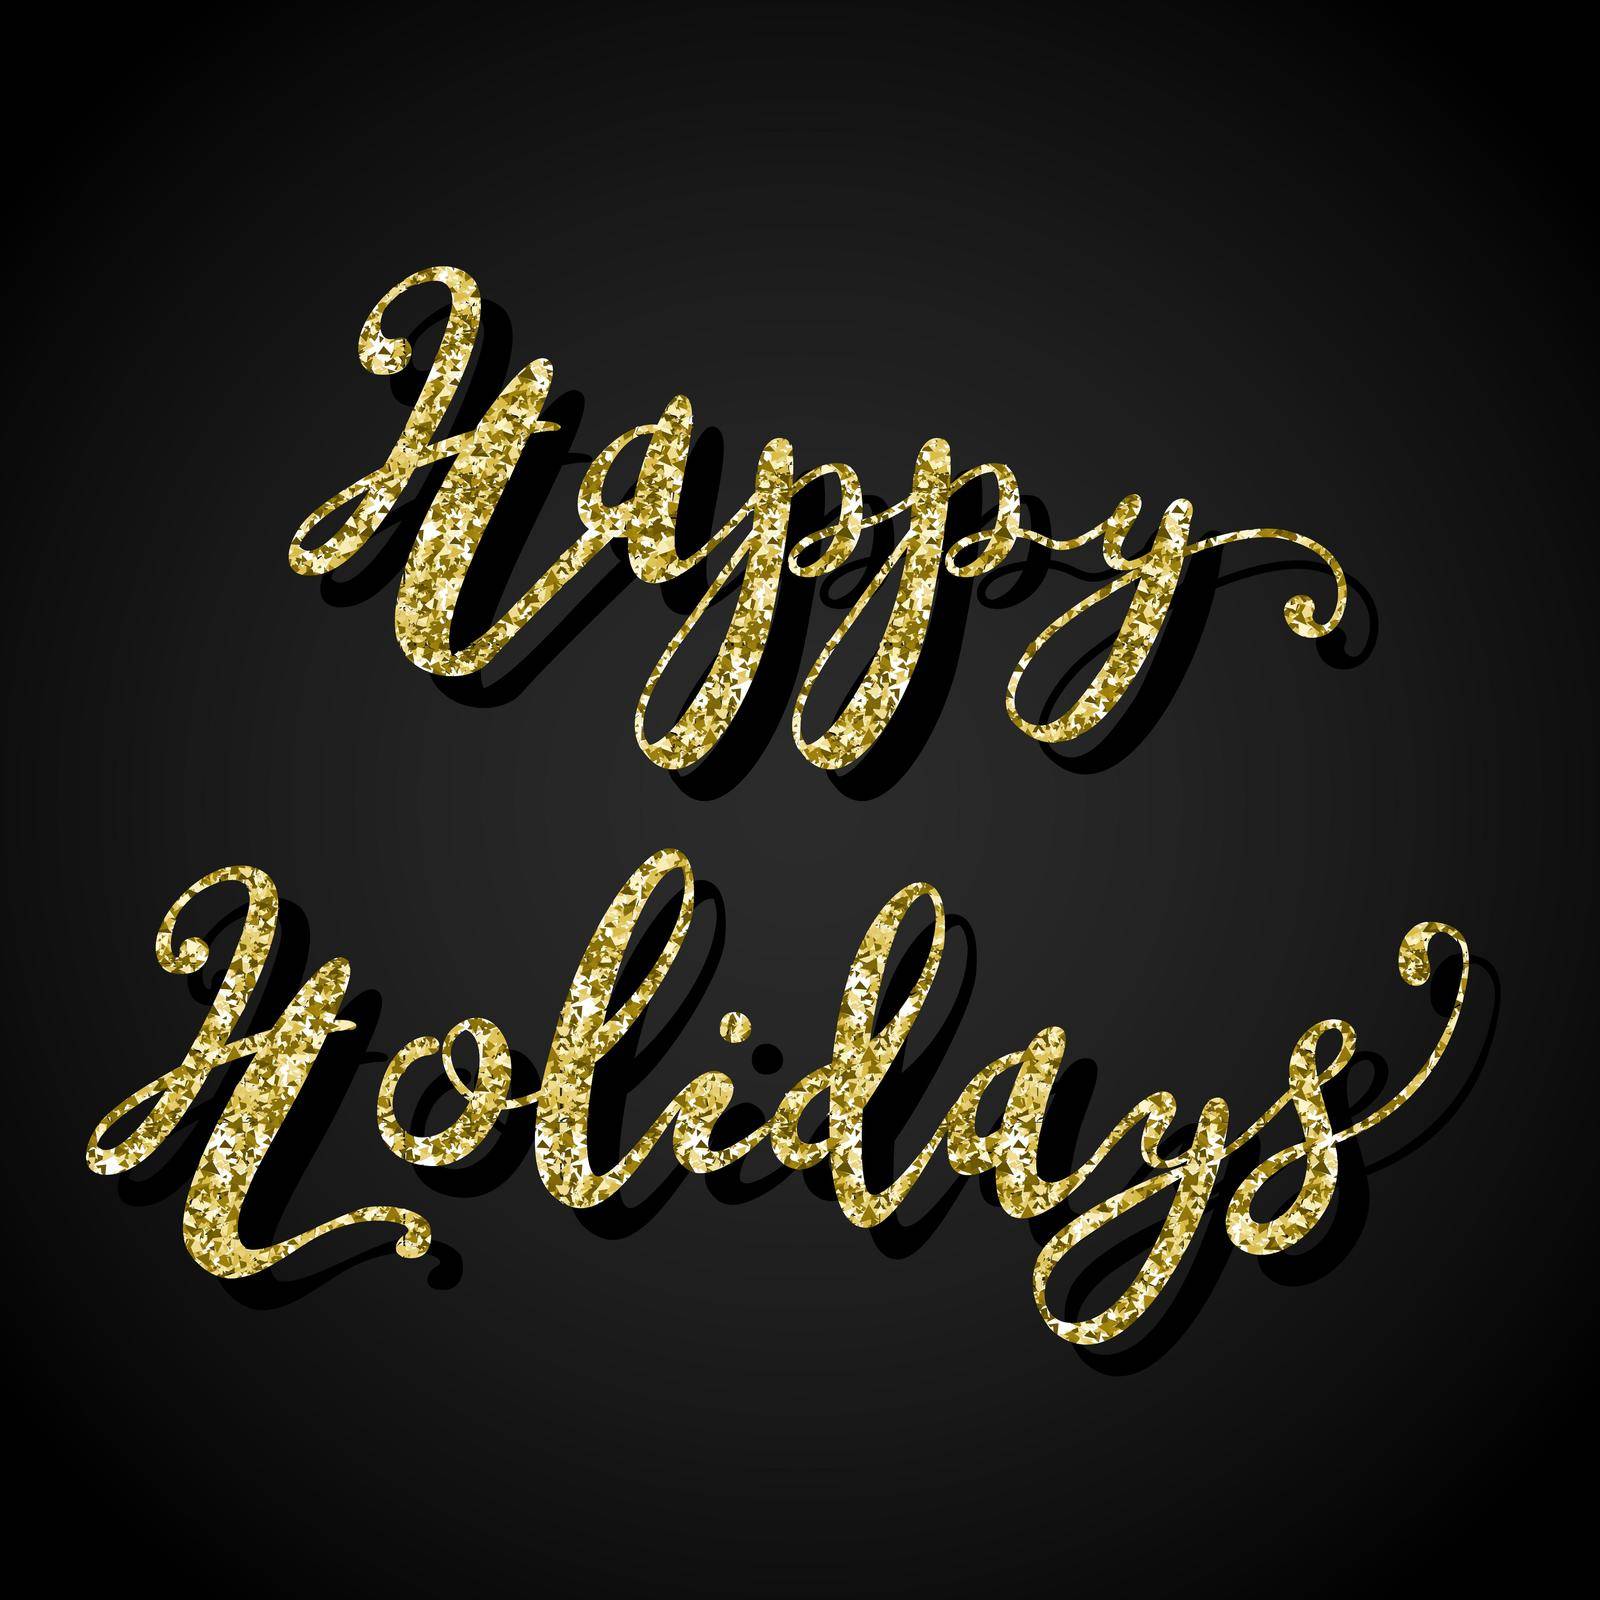 Glitter Greeting Lettering Happy Holidays by Xeniasnowstorm